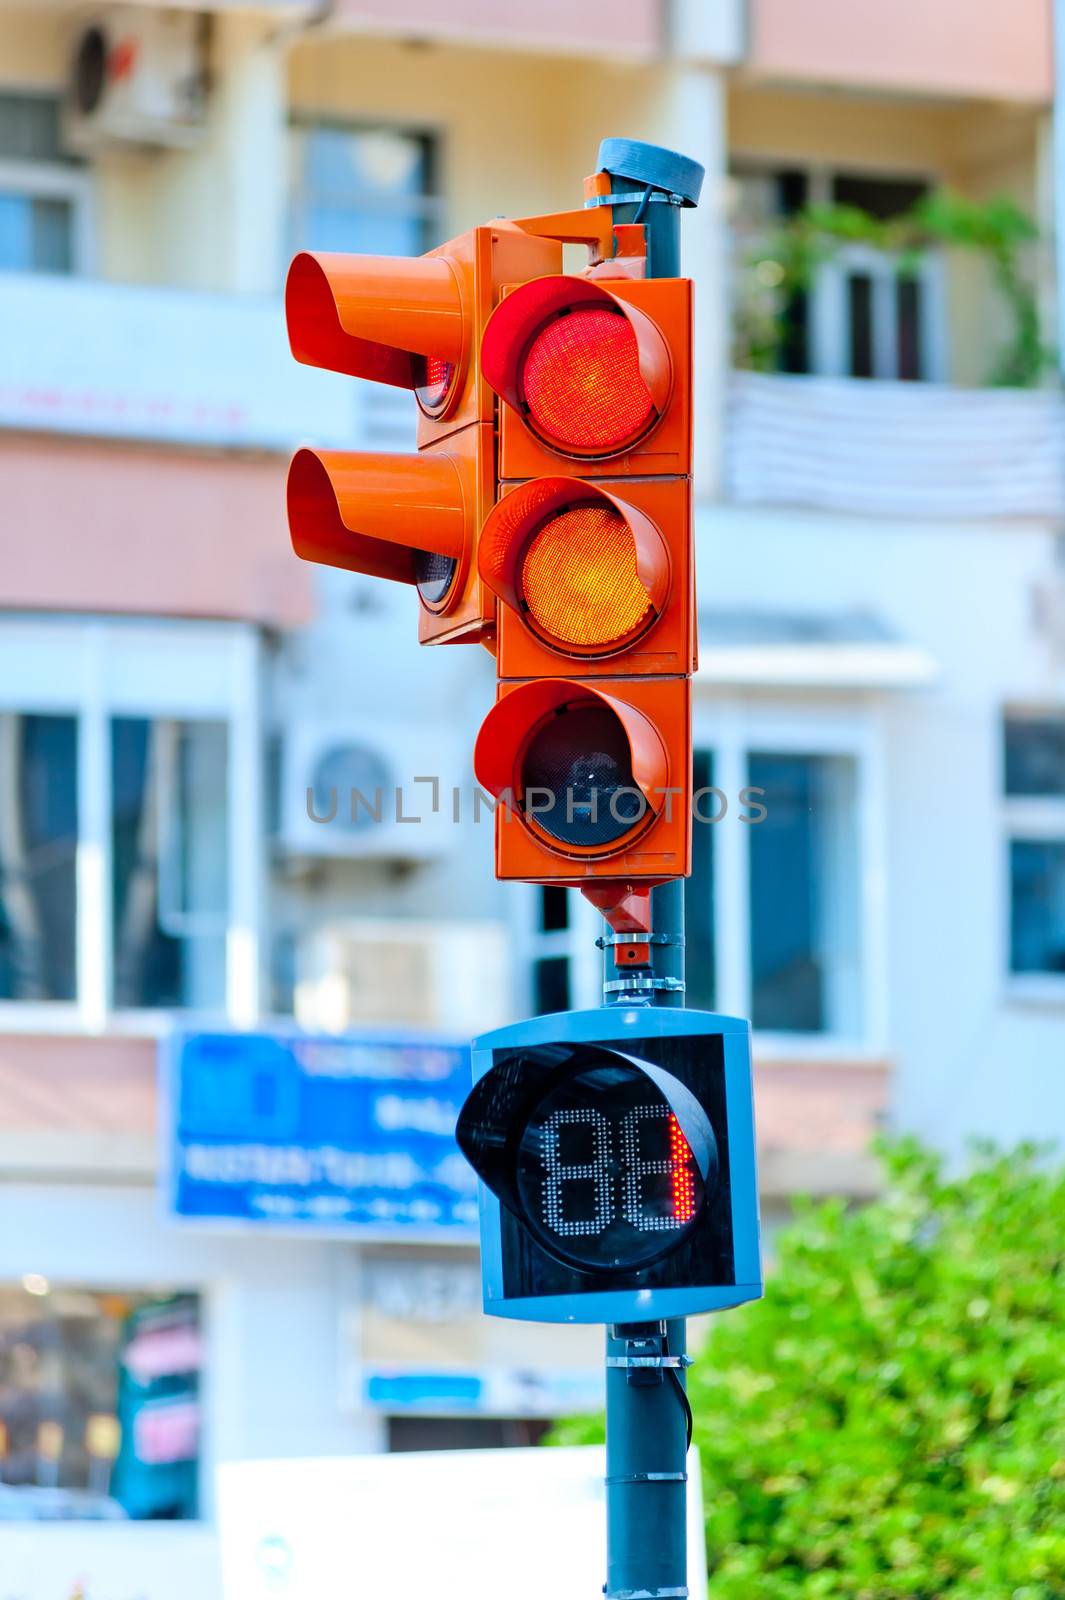 traffic light on the background of a city street